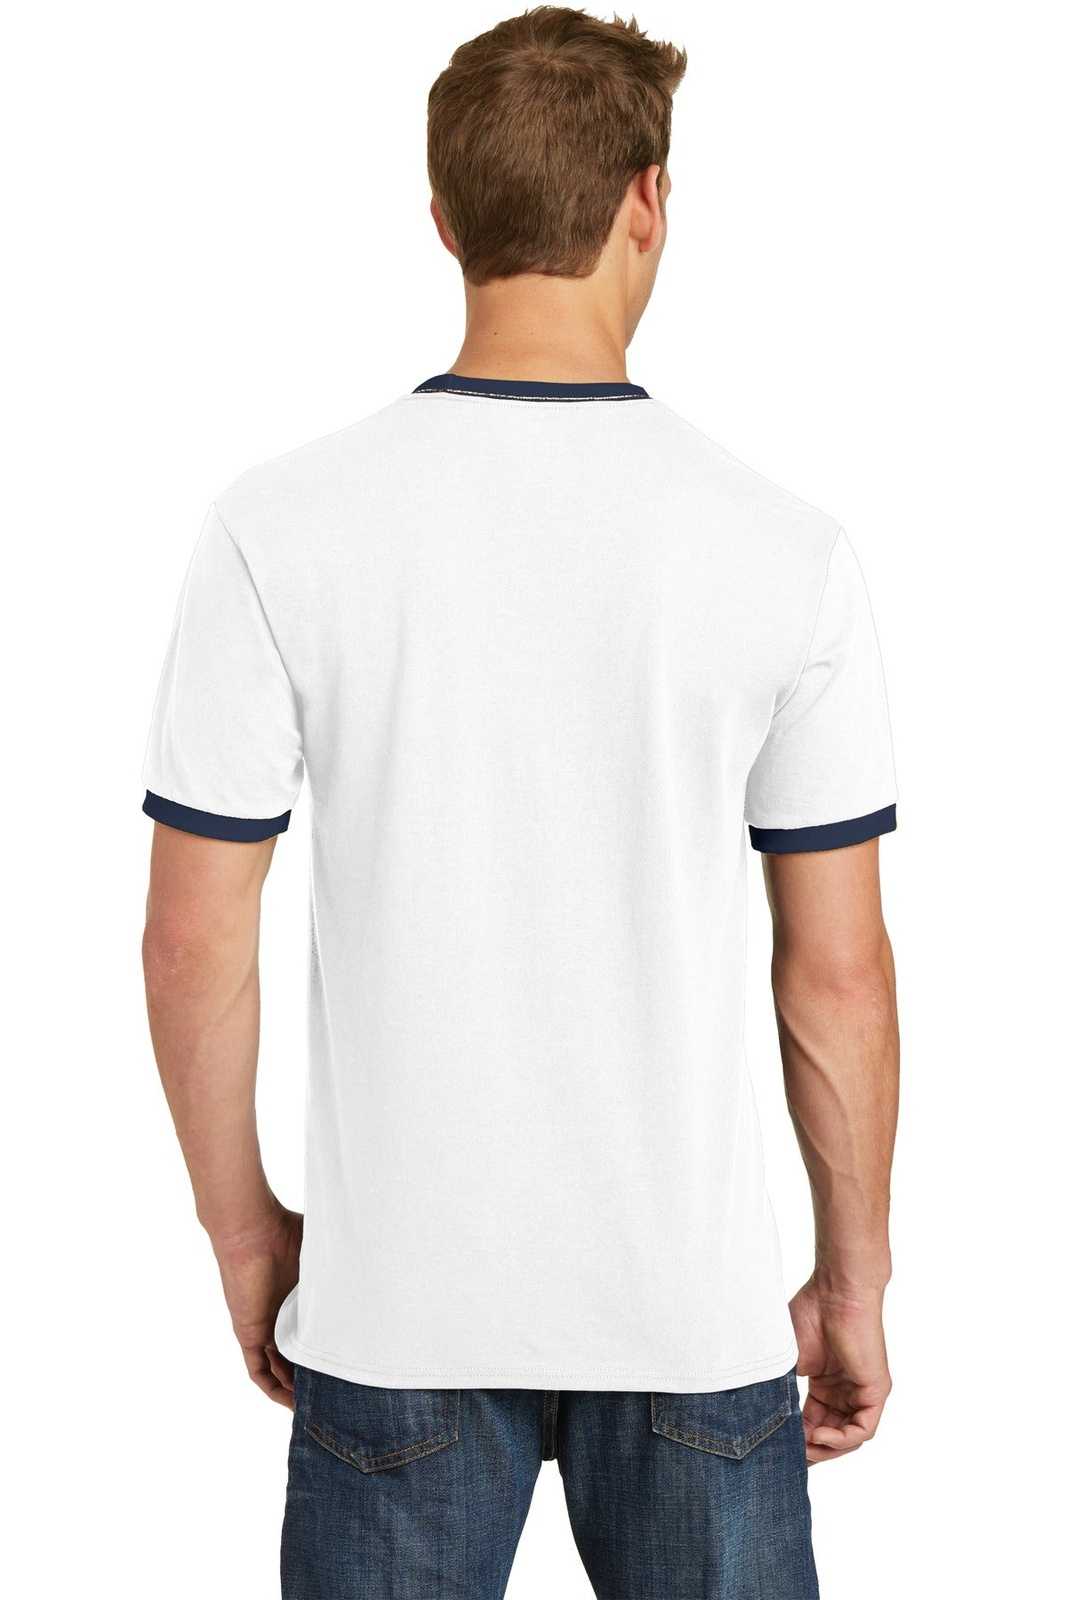 Port & Company PC54R Core Cotton Ringer Tee - White Navy - HIT a Double - 1